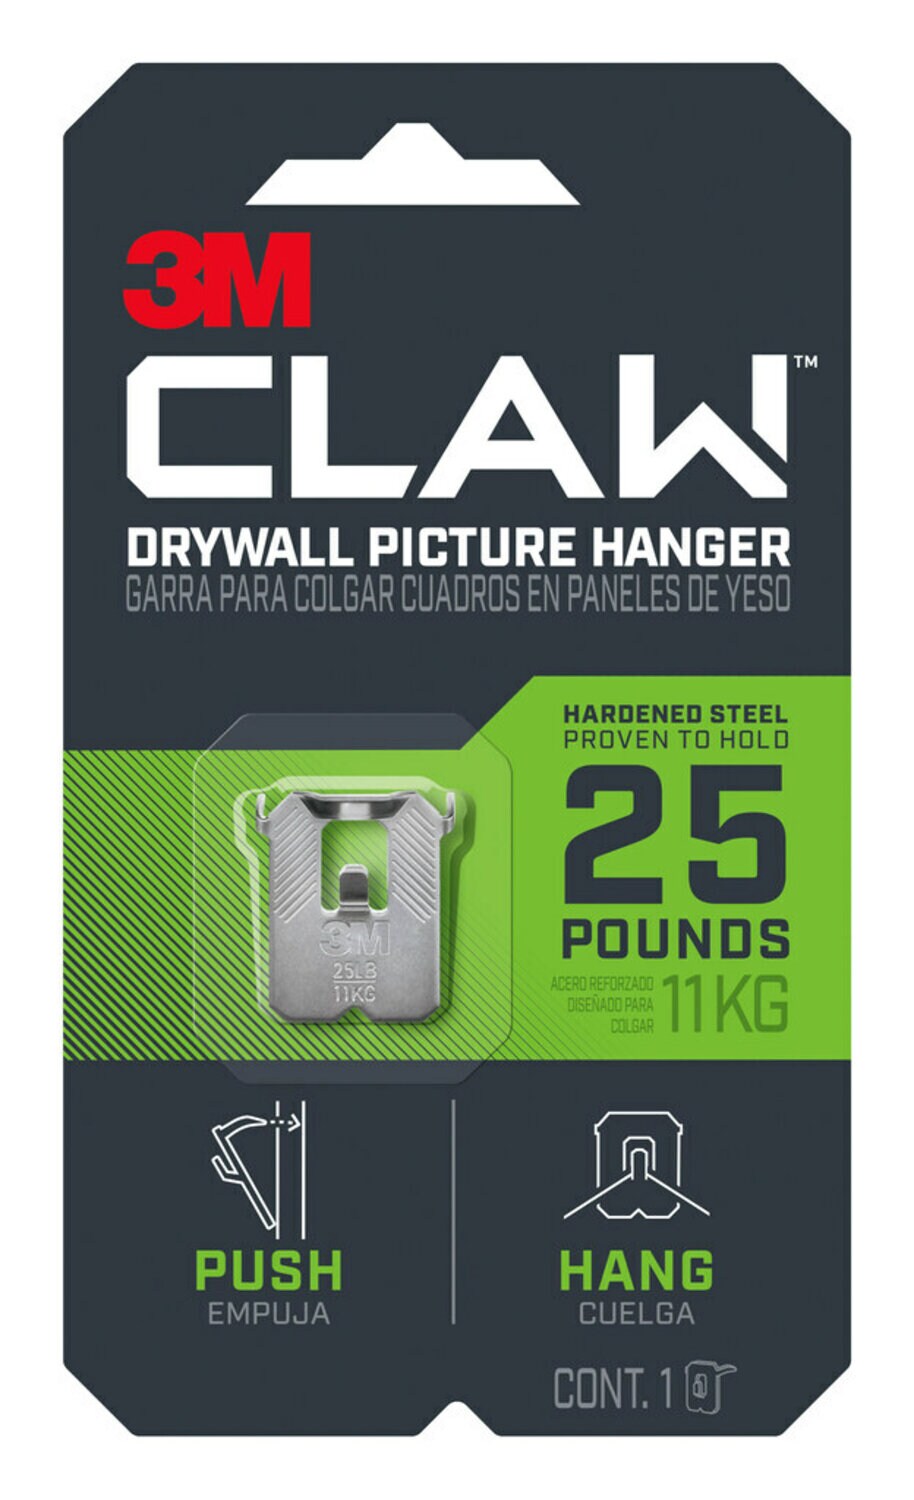 7100233257 - 3M CLAW Drywall Picture Hanger 25 lb 3PH25-1ES, 1 hanger